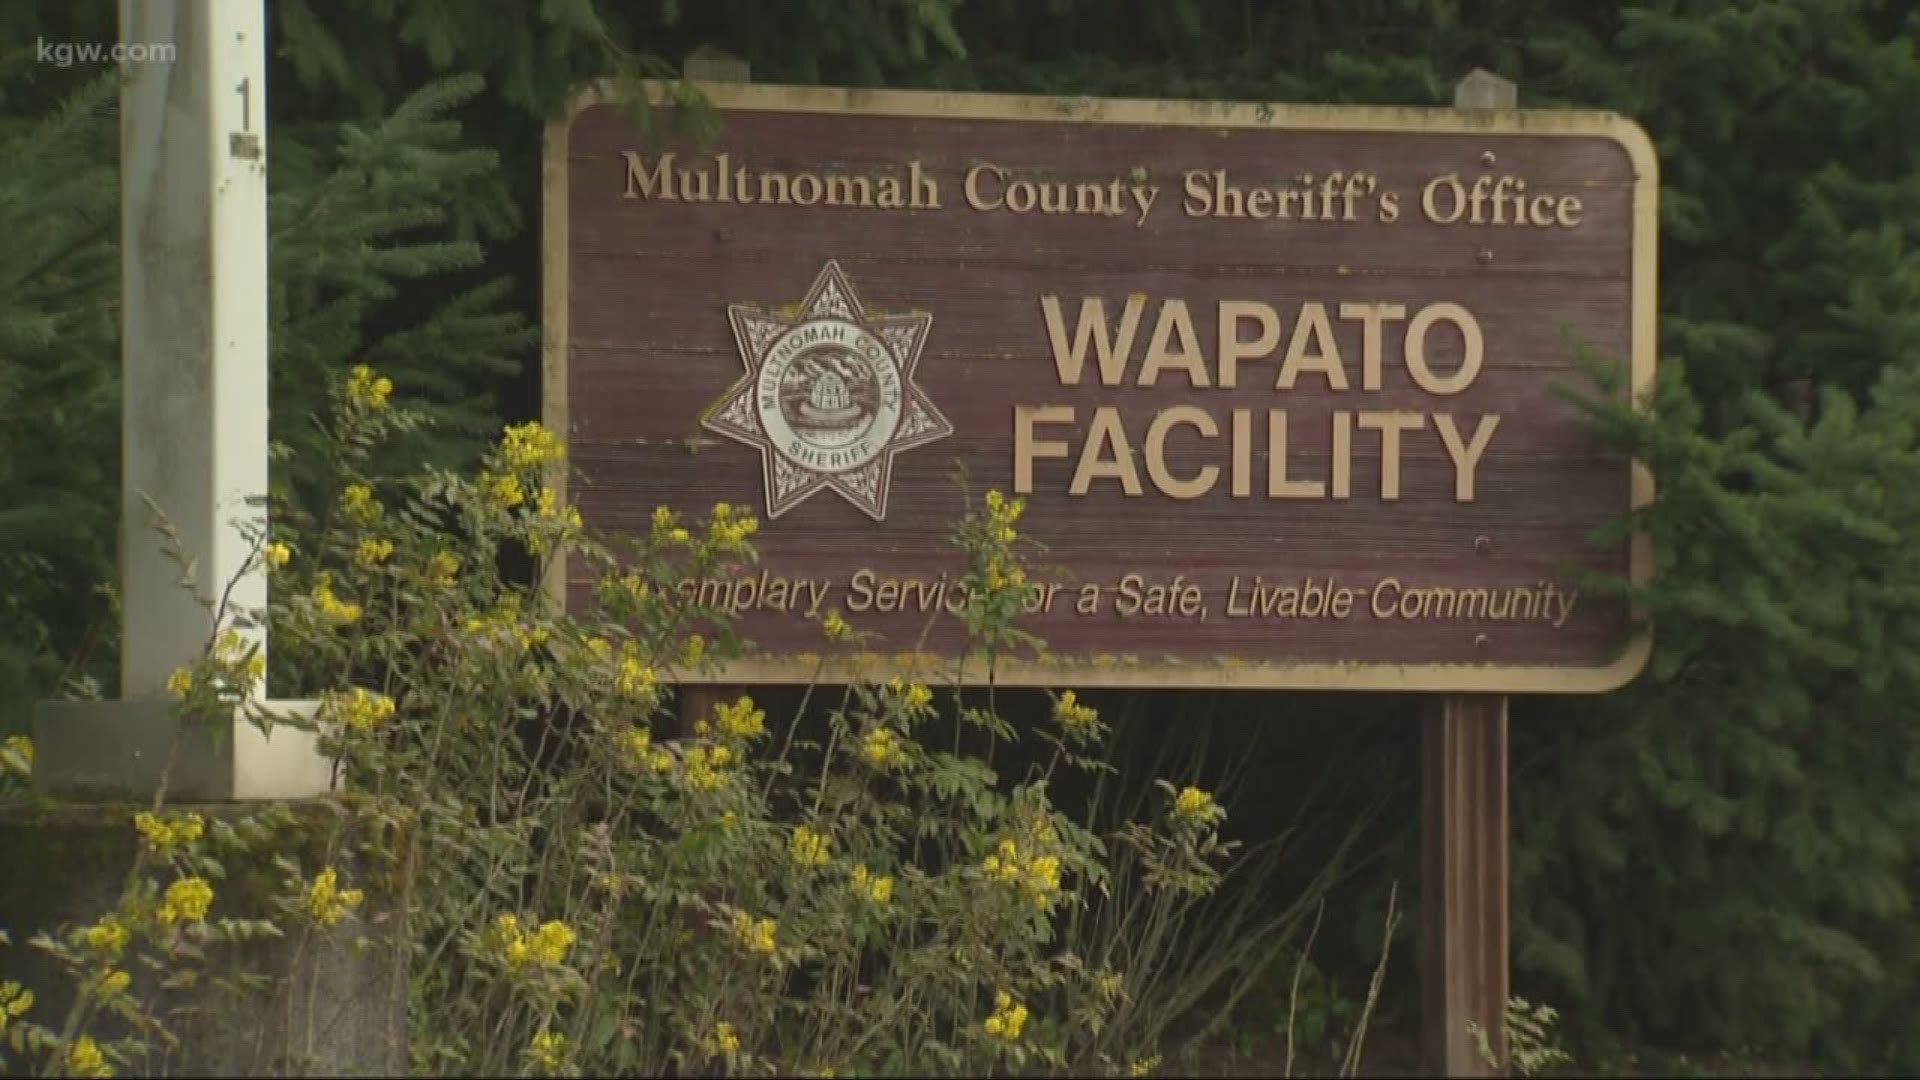 How did Wapato Jail get to this point? We break it down.